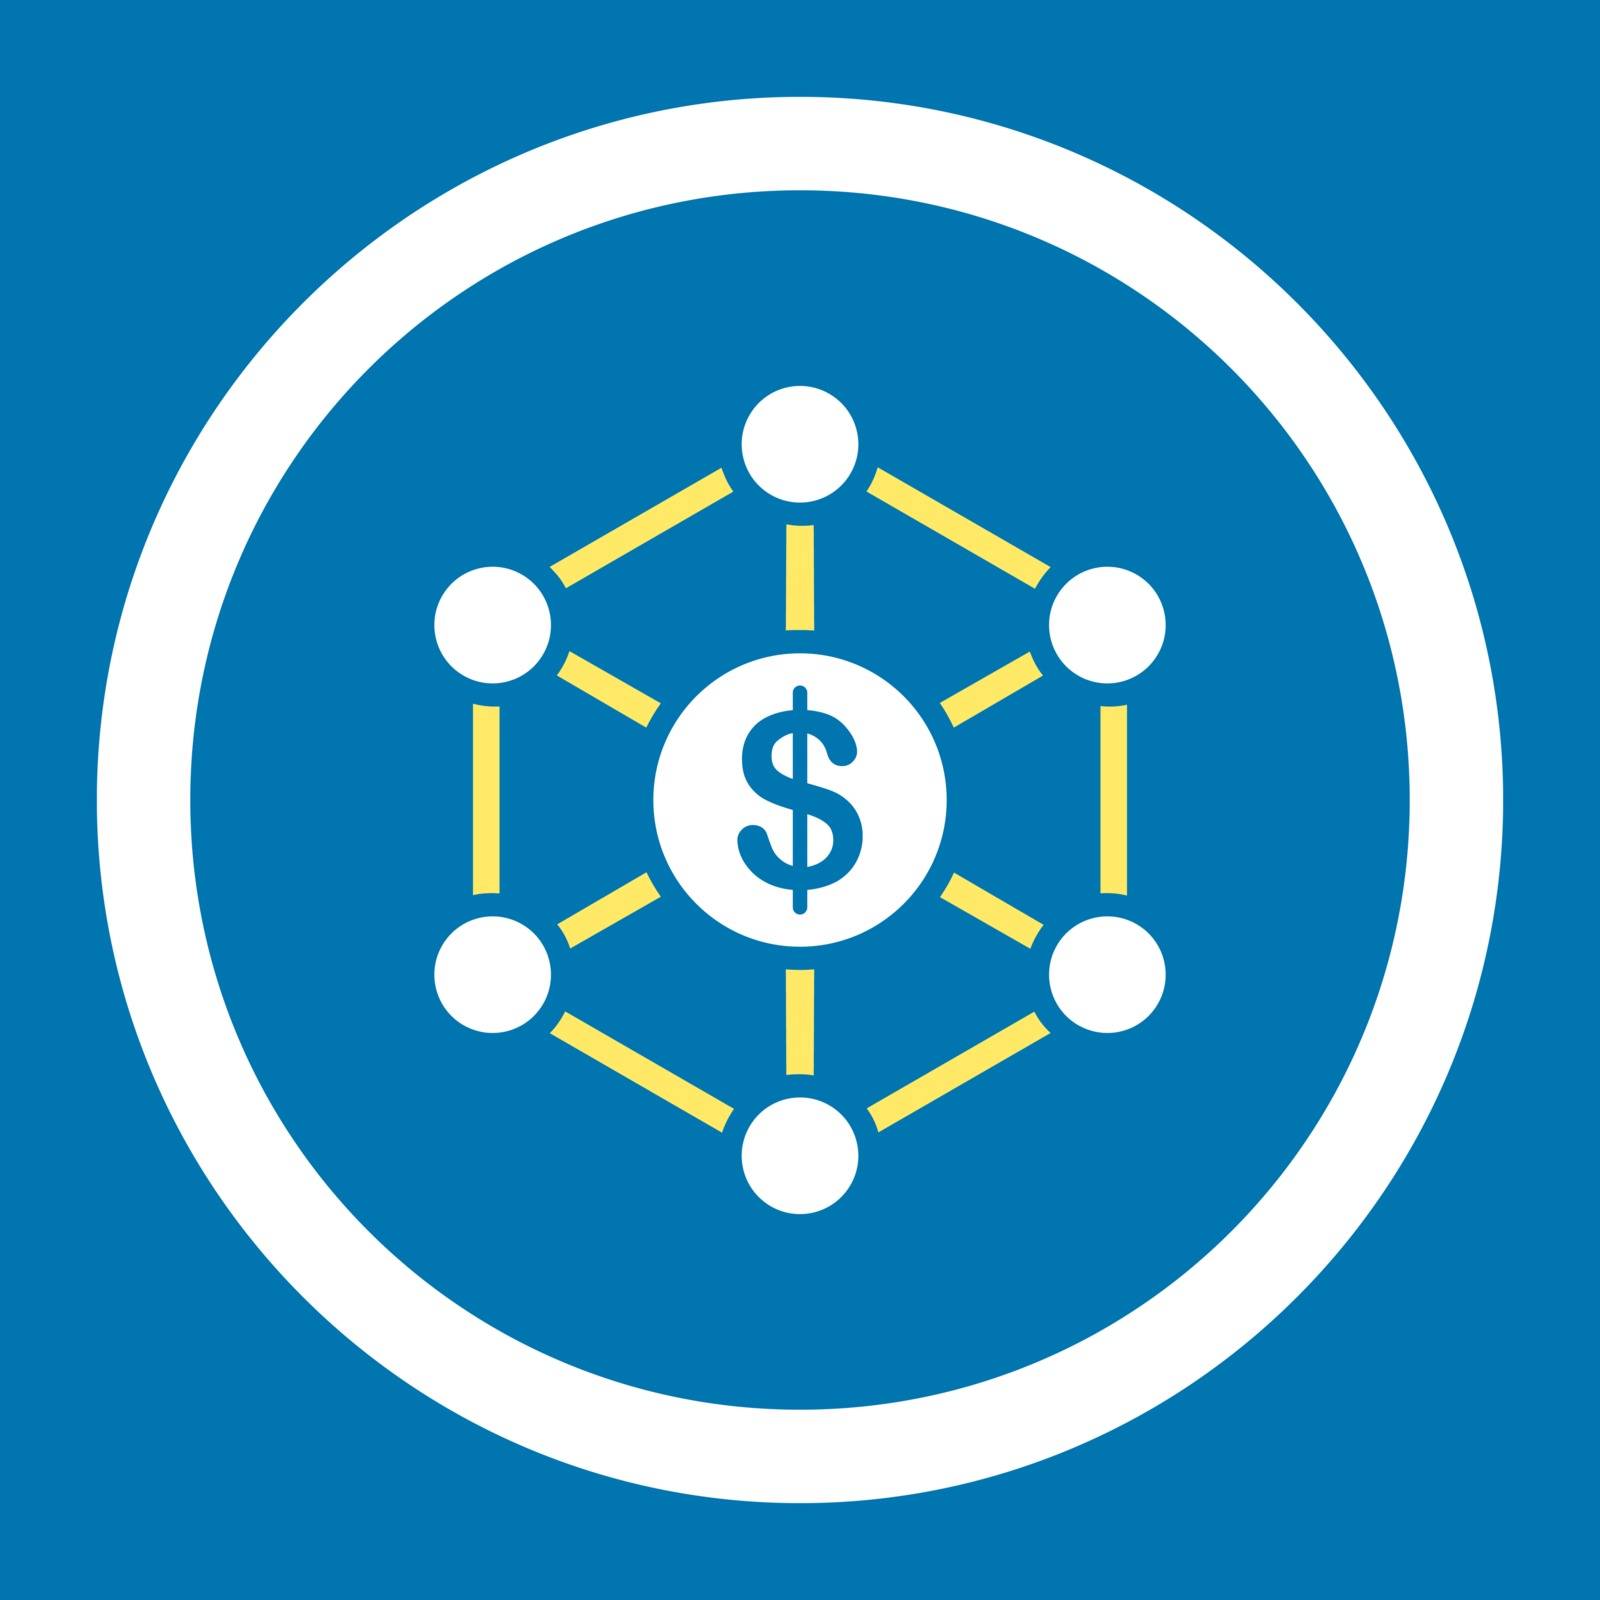 Scheme vector icon. This flat rounded symbol uses yellow and white colors and isolated on a blue background.